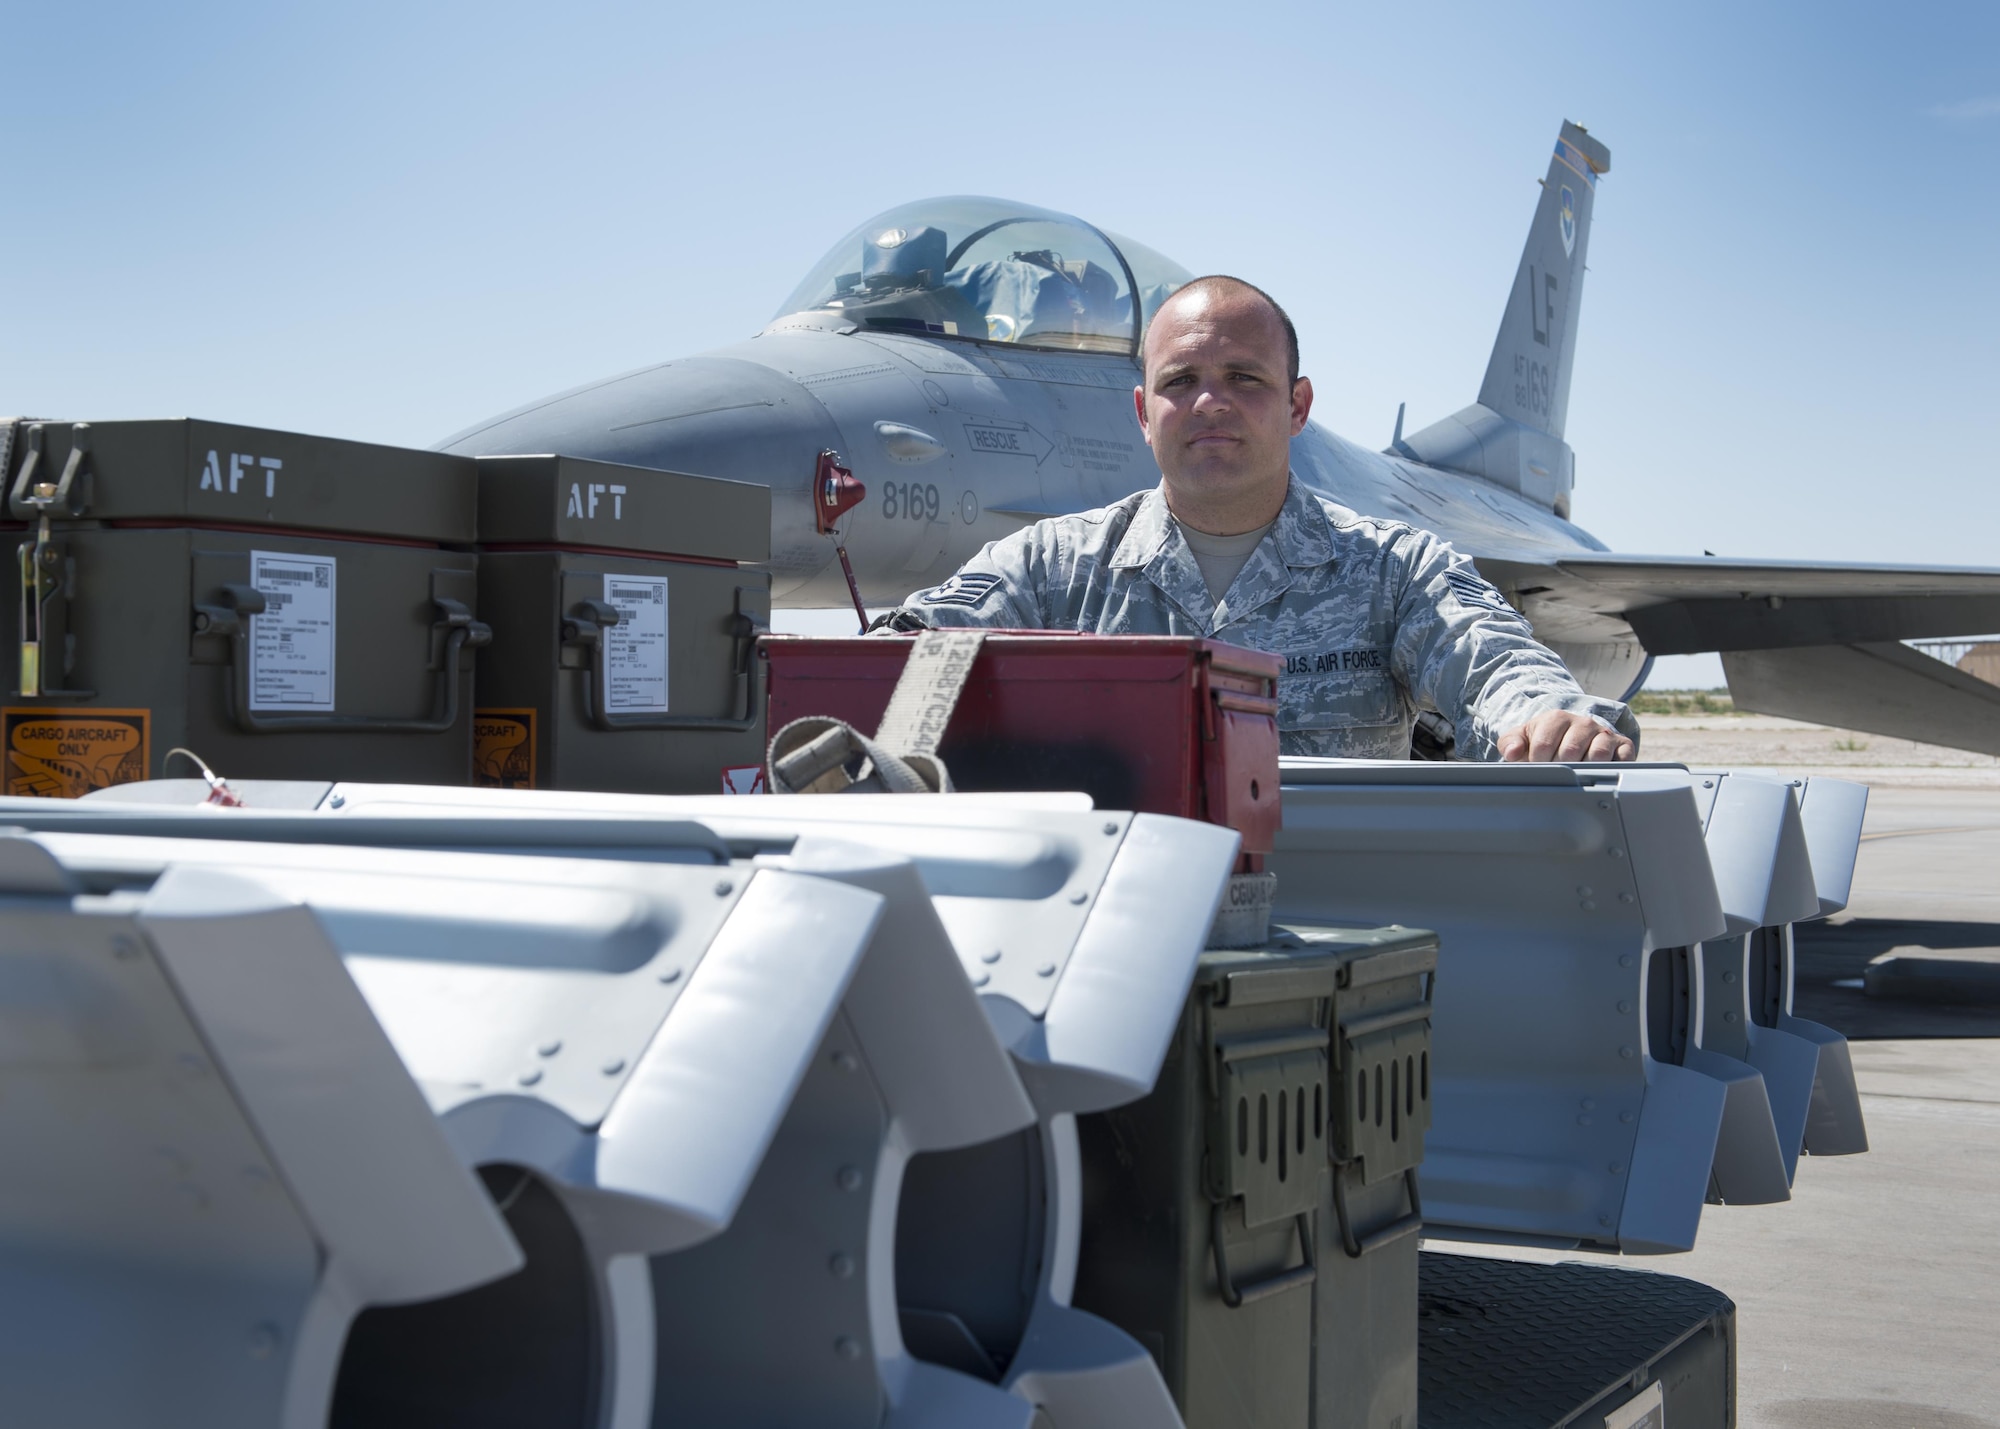 Staff Sgt. Kenneth, a 49th Maintenance Squadron line delivery crew chief, stands beside a loaded ammunition trailer waiting to arm an F-16 Fighting Falcon on Holloman. “We are the ones who give the munitions to the people who go and fight,” said Kenneth. “Without our job, those fighter craft are just an expensive airline.” (Last names are withheld due to operational requirements. U.S. Air Force photo by Senior Airman BreeAnn Sachs)